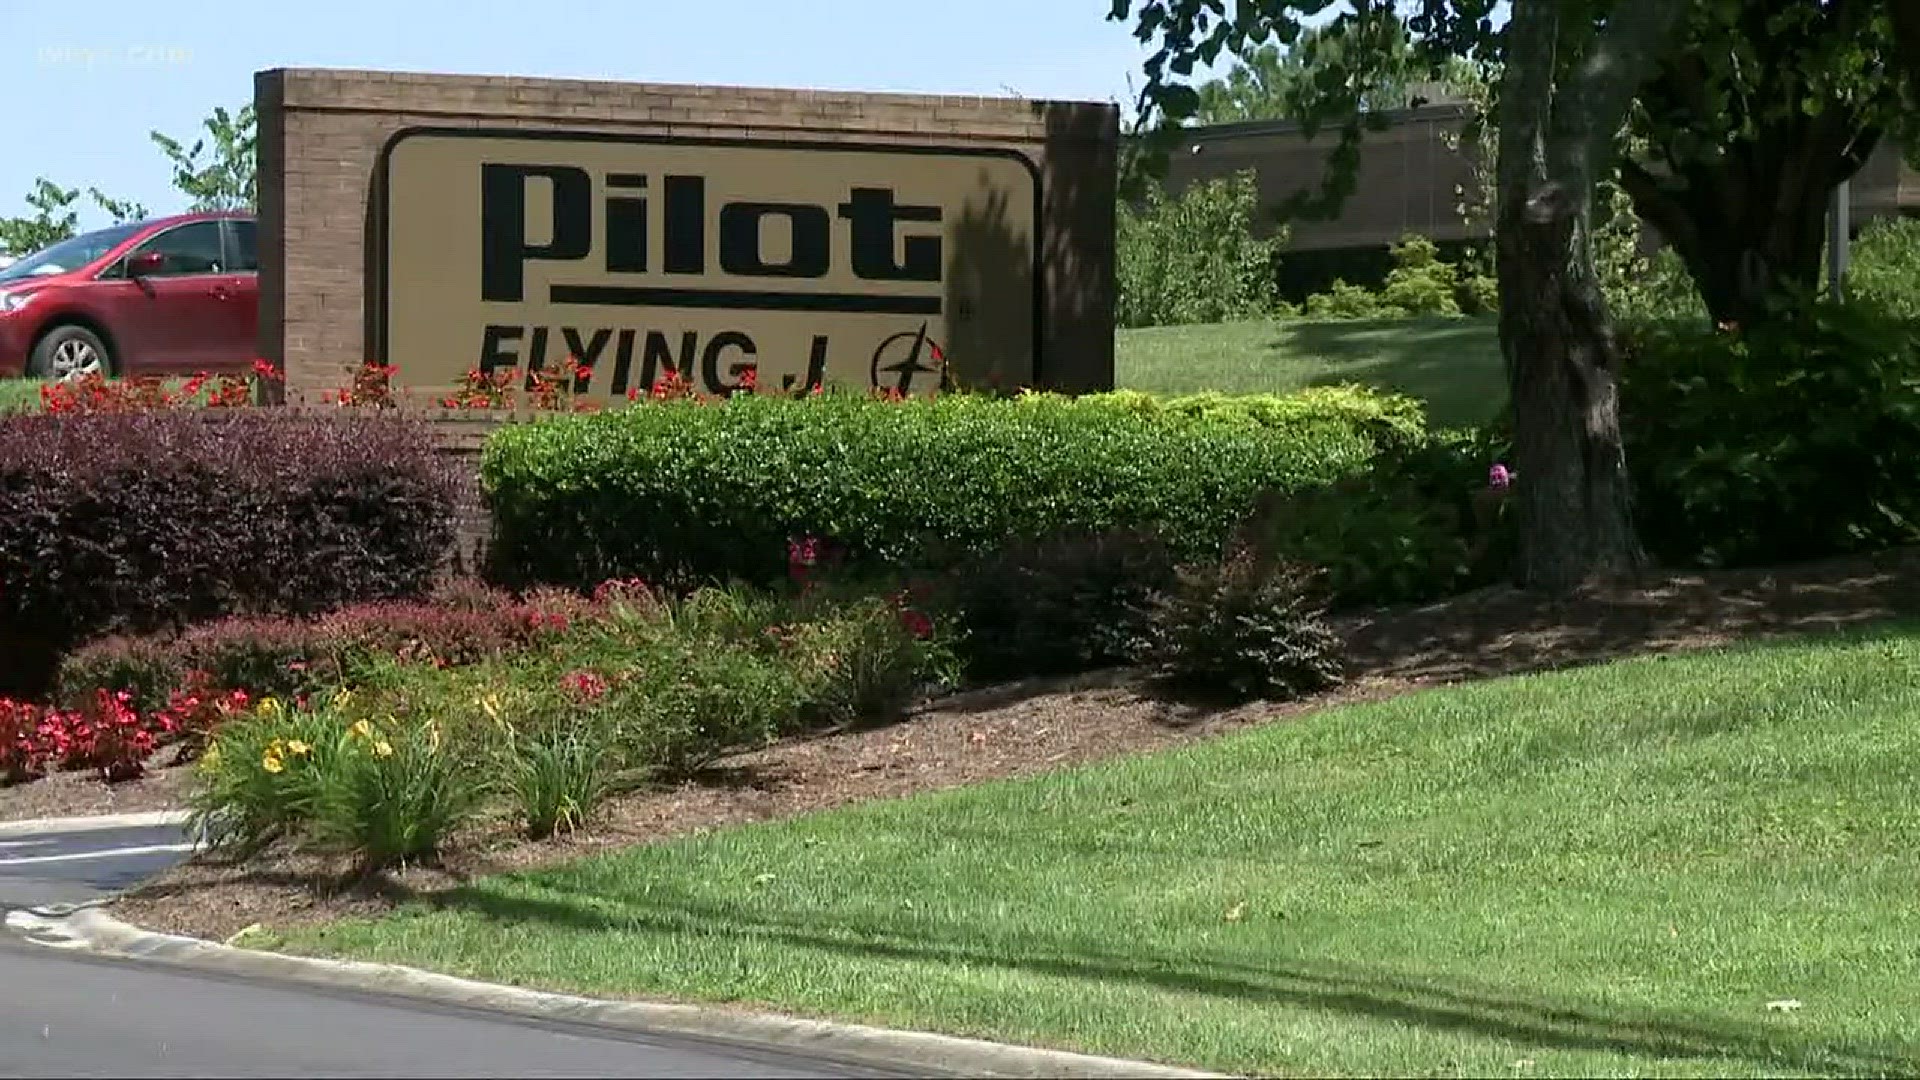 Reaction to release of controversial Pilot Flying J recordings